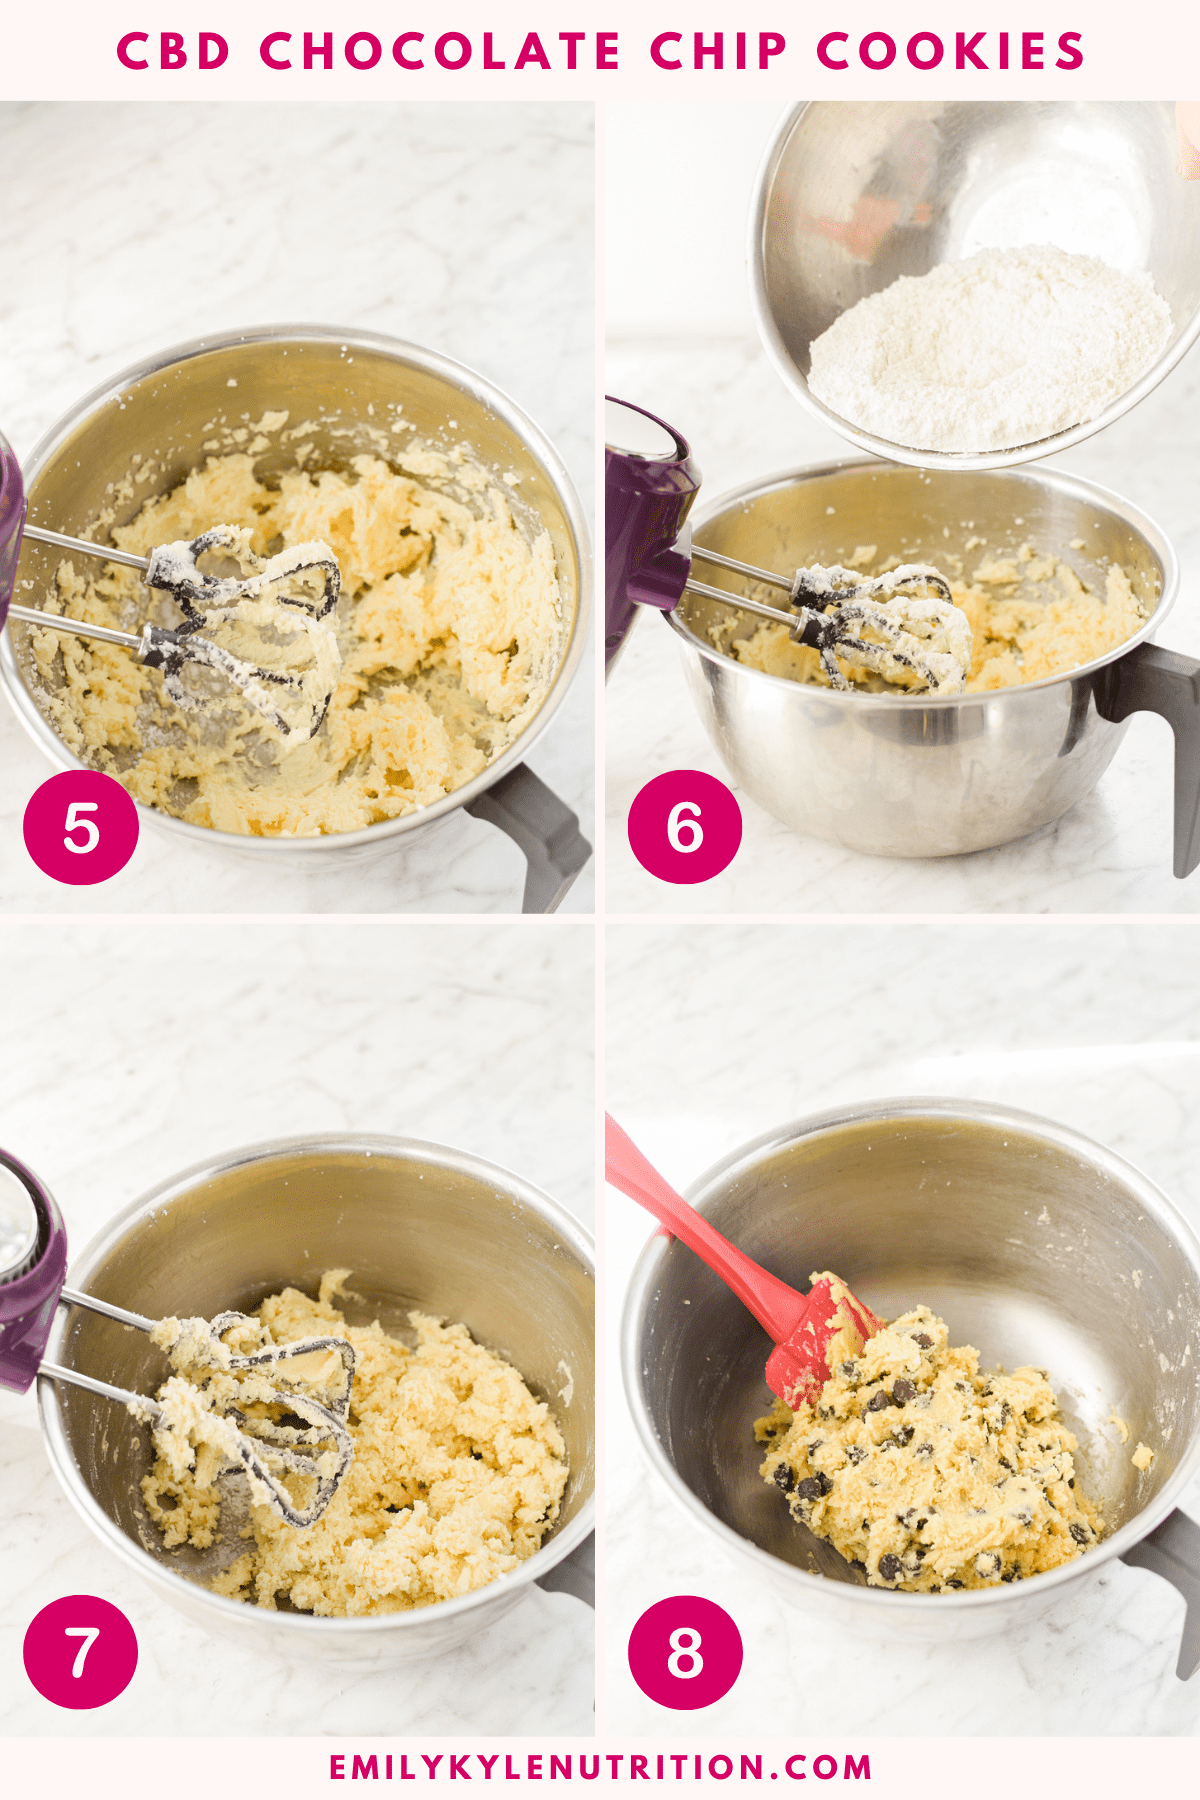 A four step image collage showing the first four steps to making CBD chocolate chip cookies.